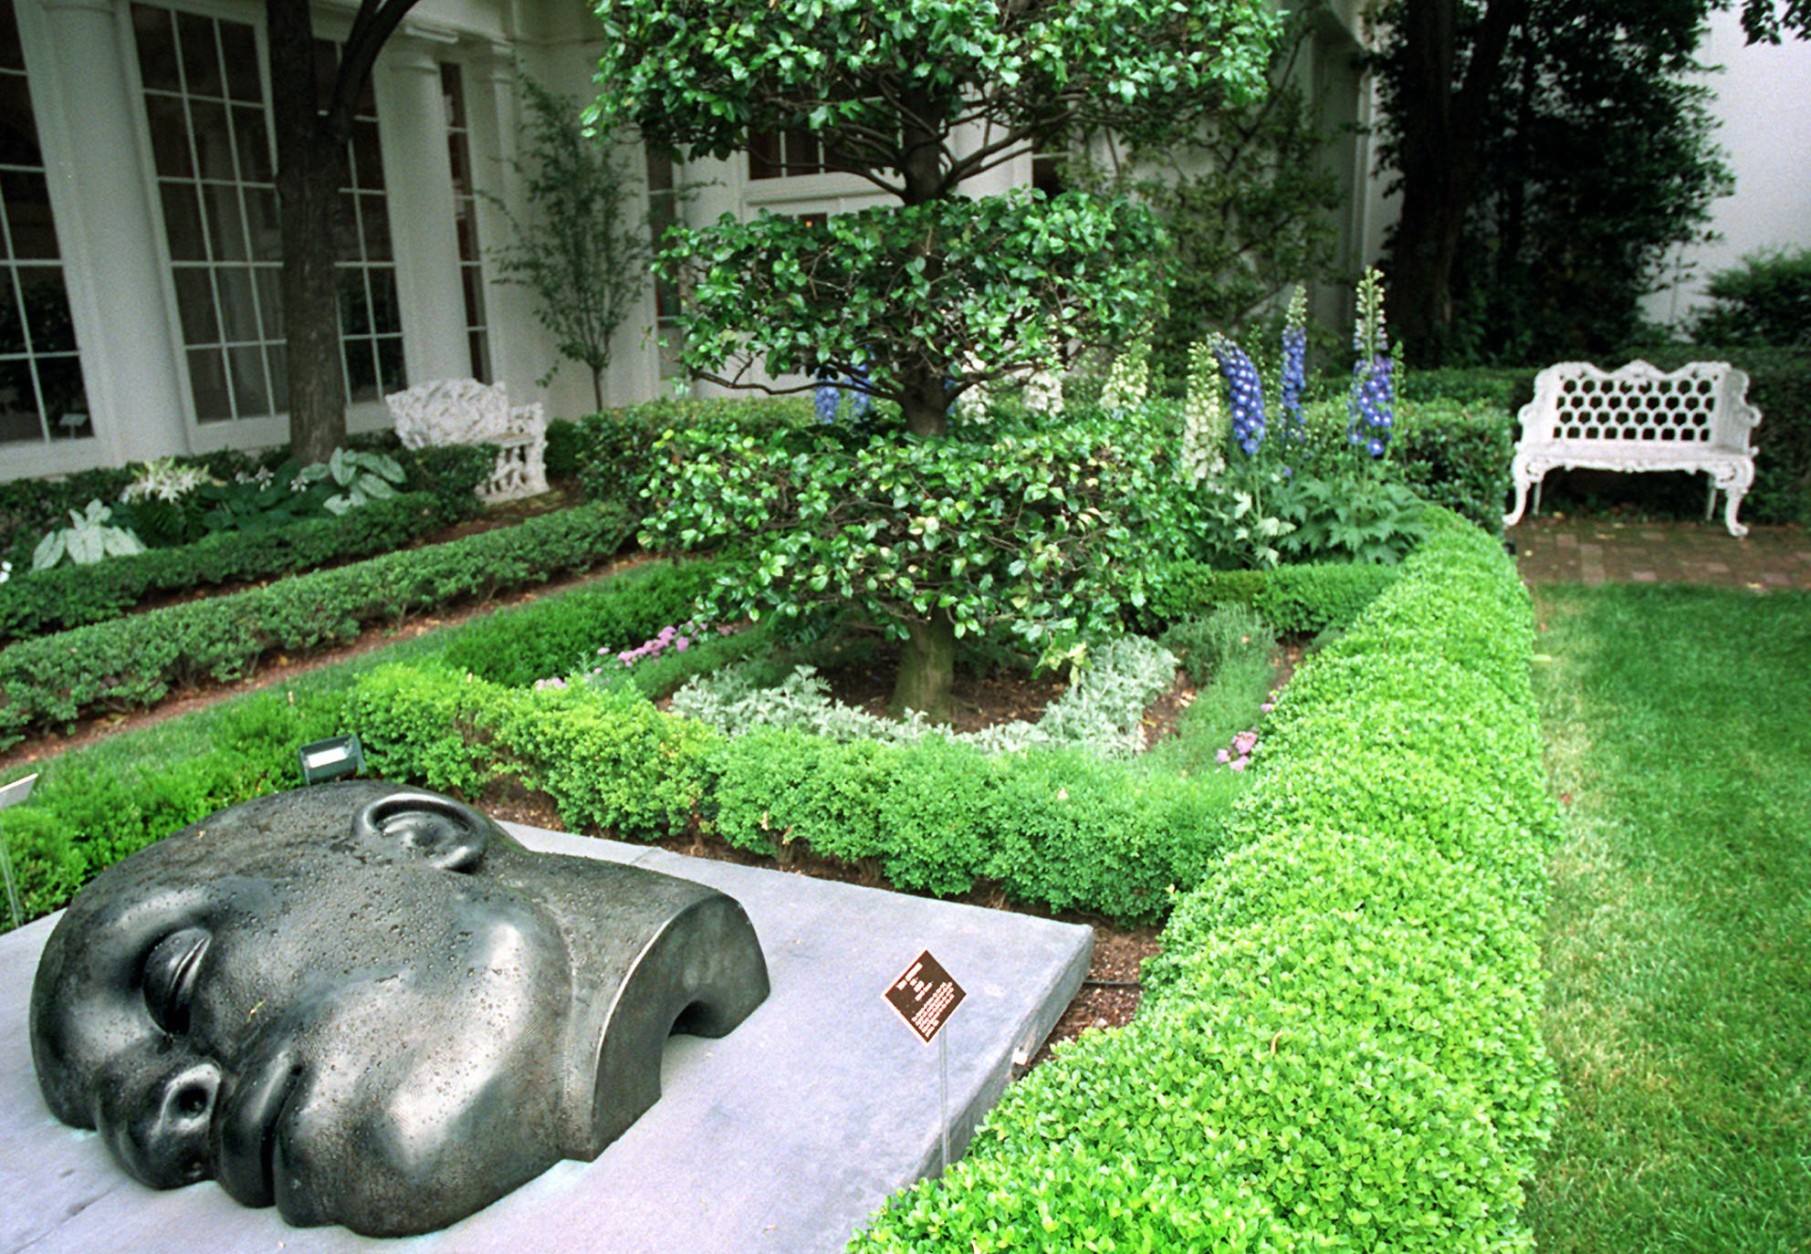 "Head" by Tom Otterness is shown Wednesday, June 12, 1996 in the First Lady's Garden at the White House. The sculpture is on loan and part of a rotating exhibit. The White House garden is a place where roses are named for Nancy Reagan and Pat Nixon, and a tulip for Hillary Rodham Clinton. It is a garden that shows off with the fire of red tulips in the spring and a quilt of bronze and gold chrysanthemums in the fall. (AP Photo/Ruth Fremson)